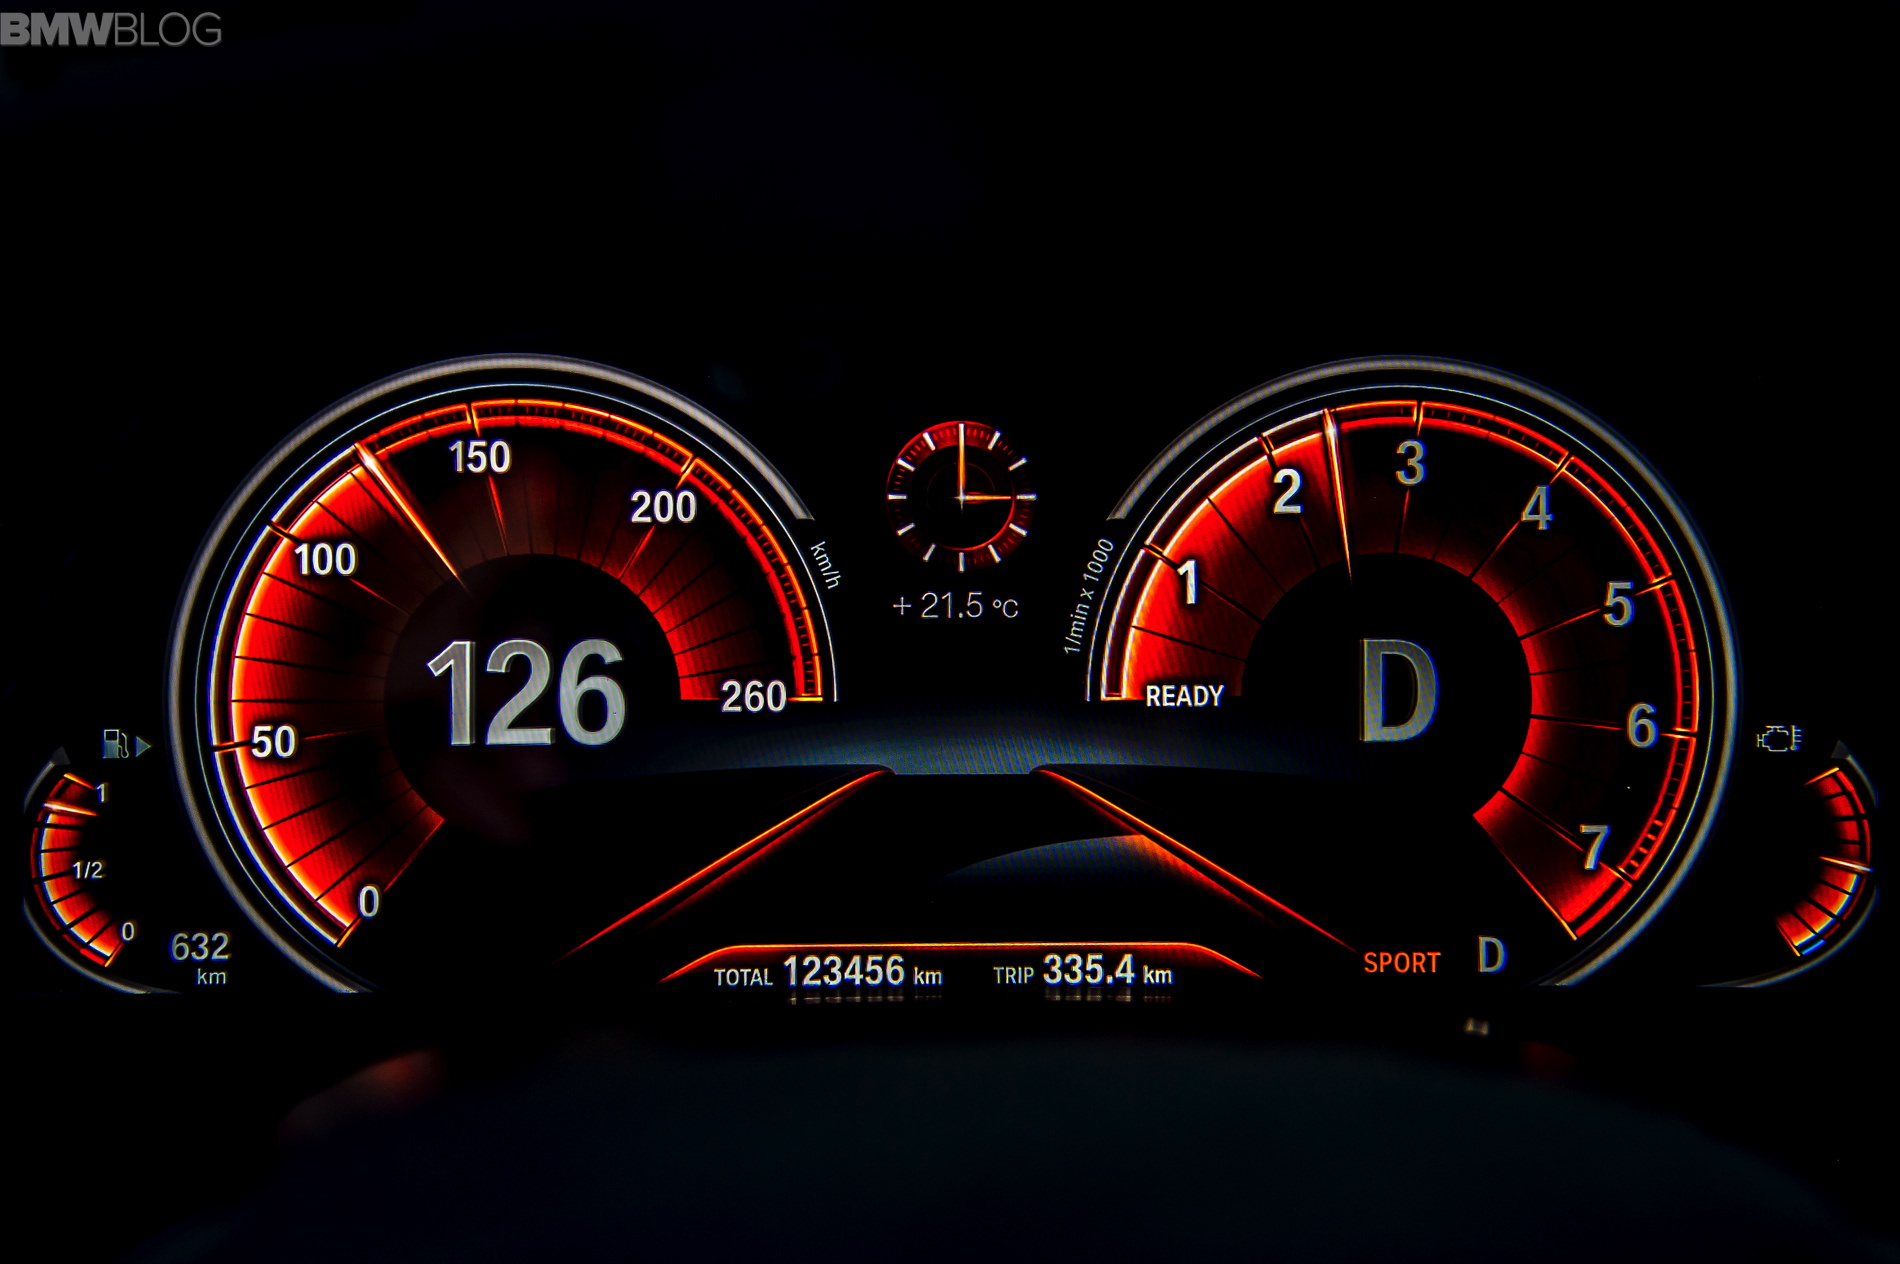 2016 bmw 7 series instrument cluster images 05